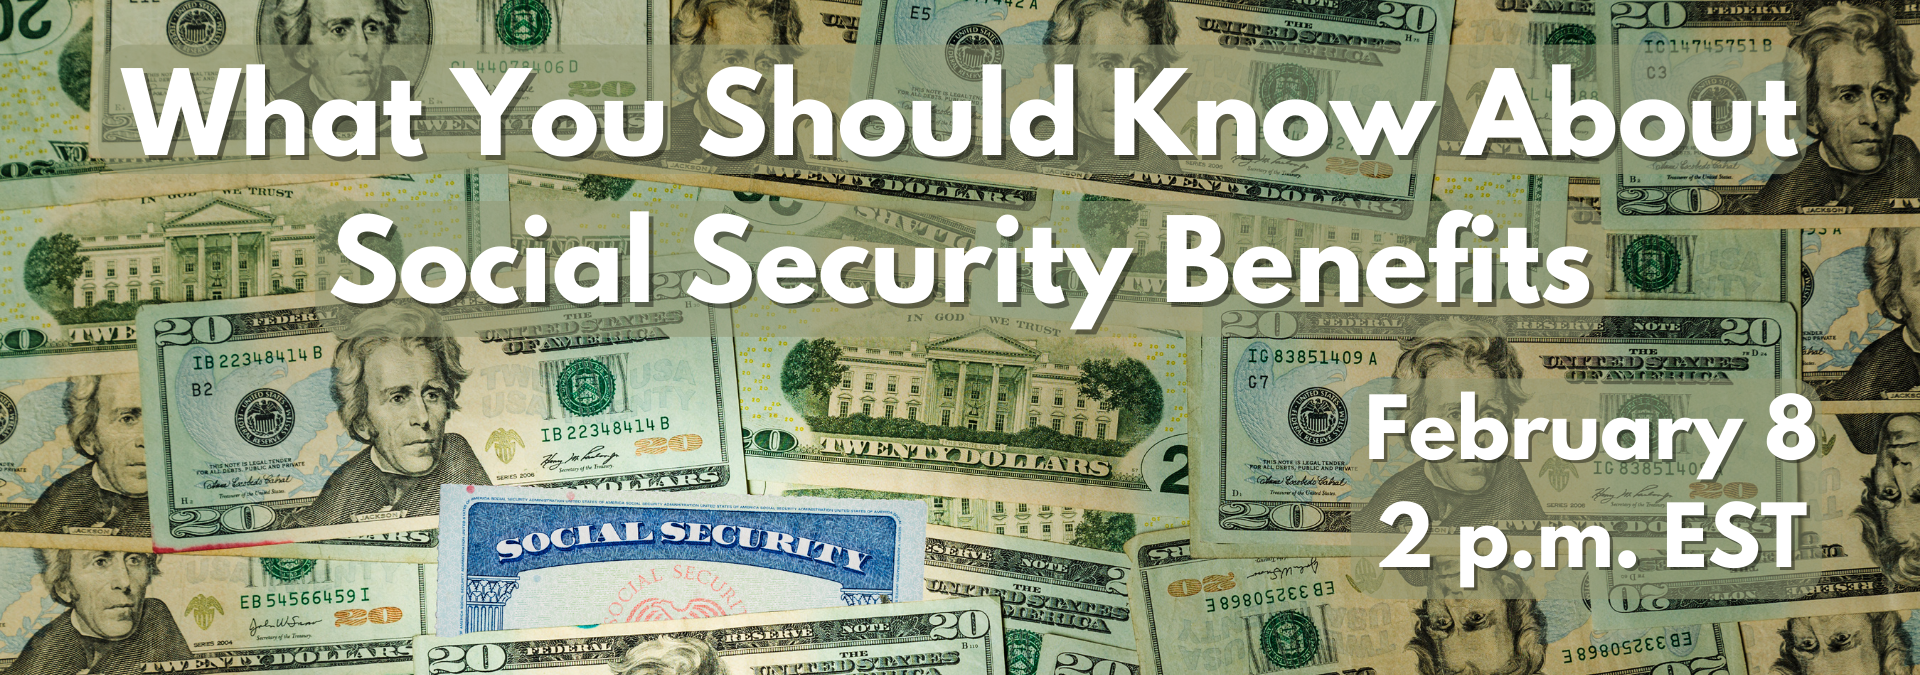 What You Should Know About Social Security Benefits